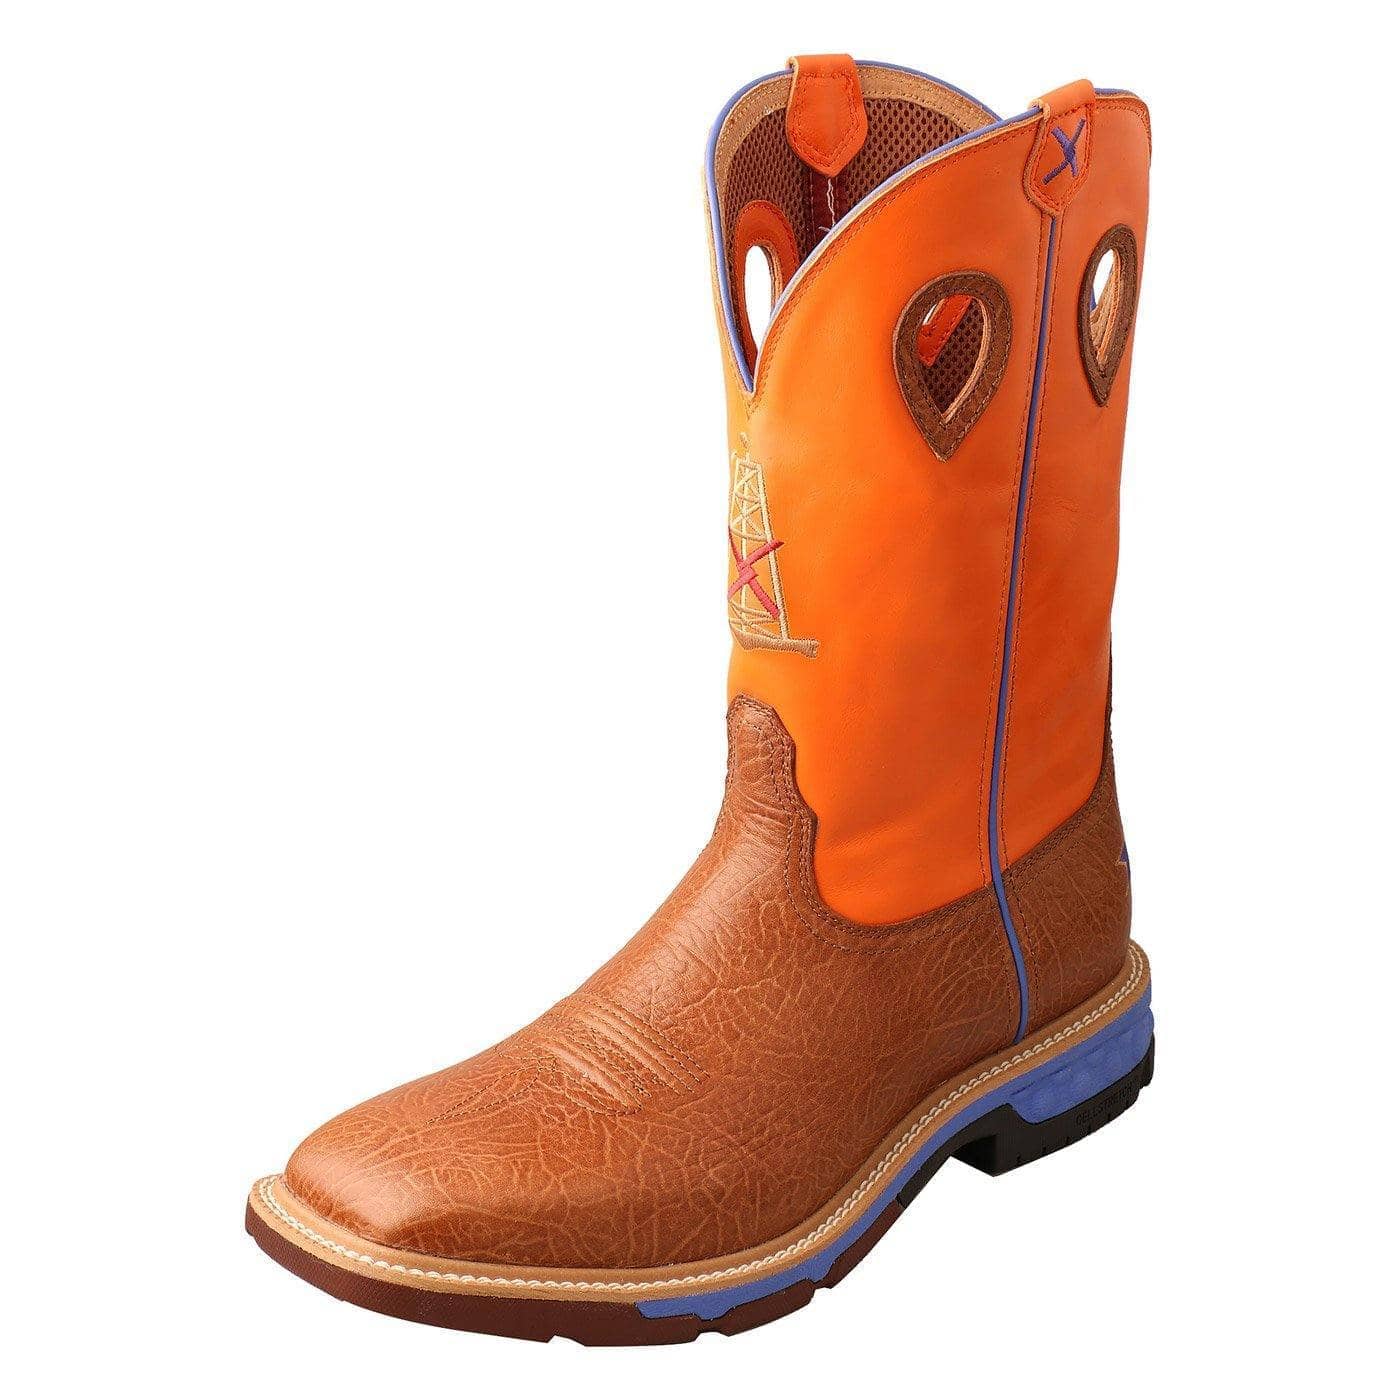 TWISTED X - Mens 12" Alloy Toe Western Work Boot with RIG CellStretch, Tan Bull Hide & Orange - Becker Safety and Supply